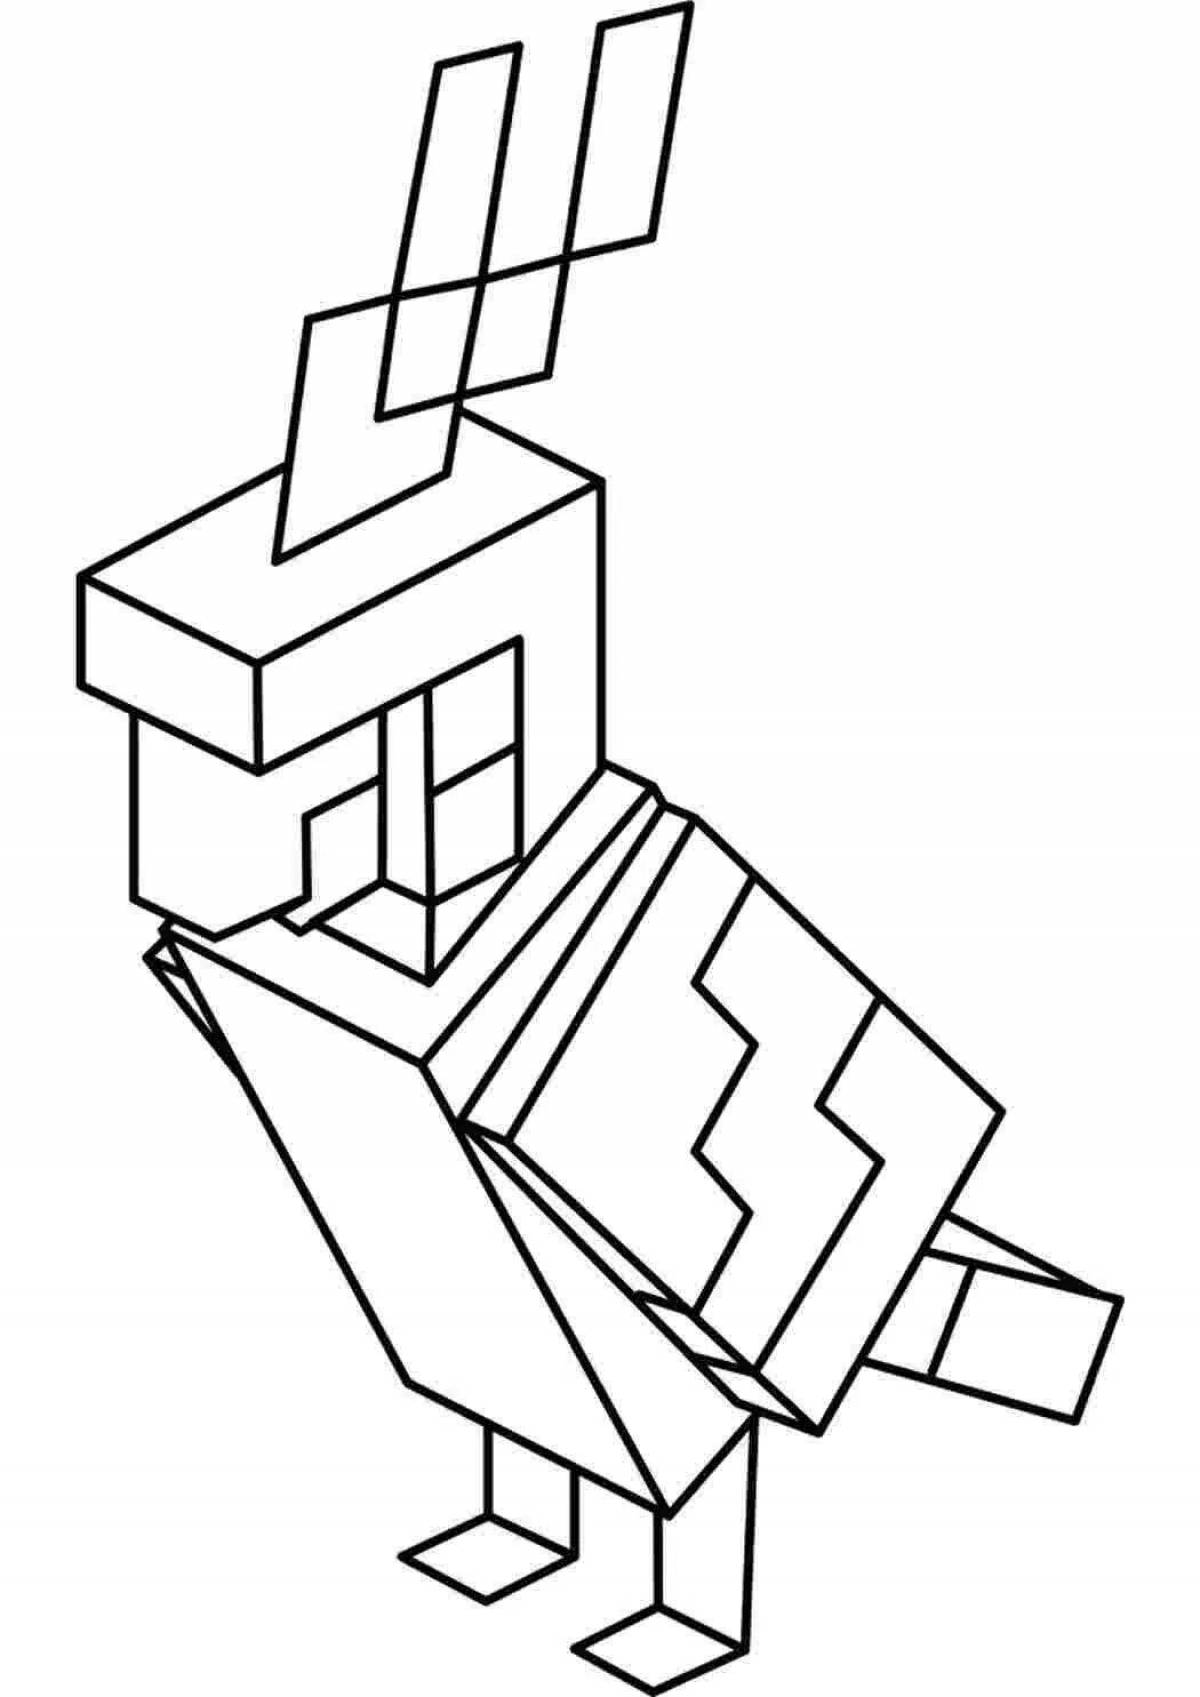 Fun apple minecraft coloring page